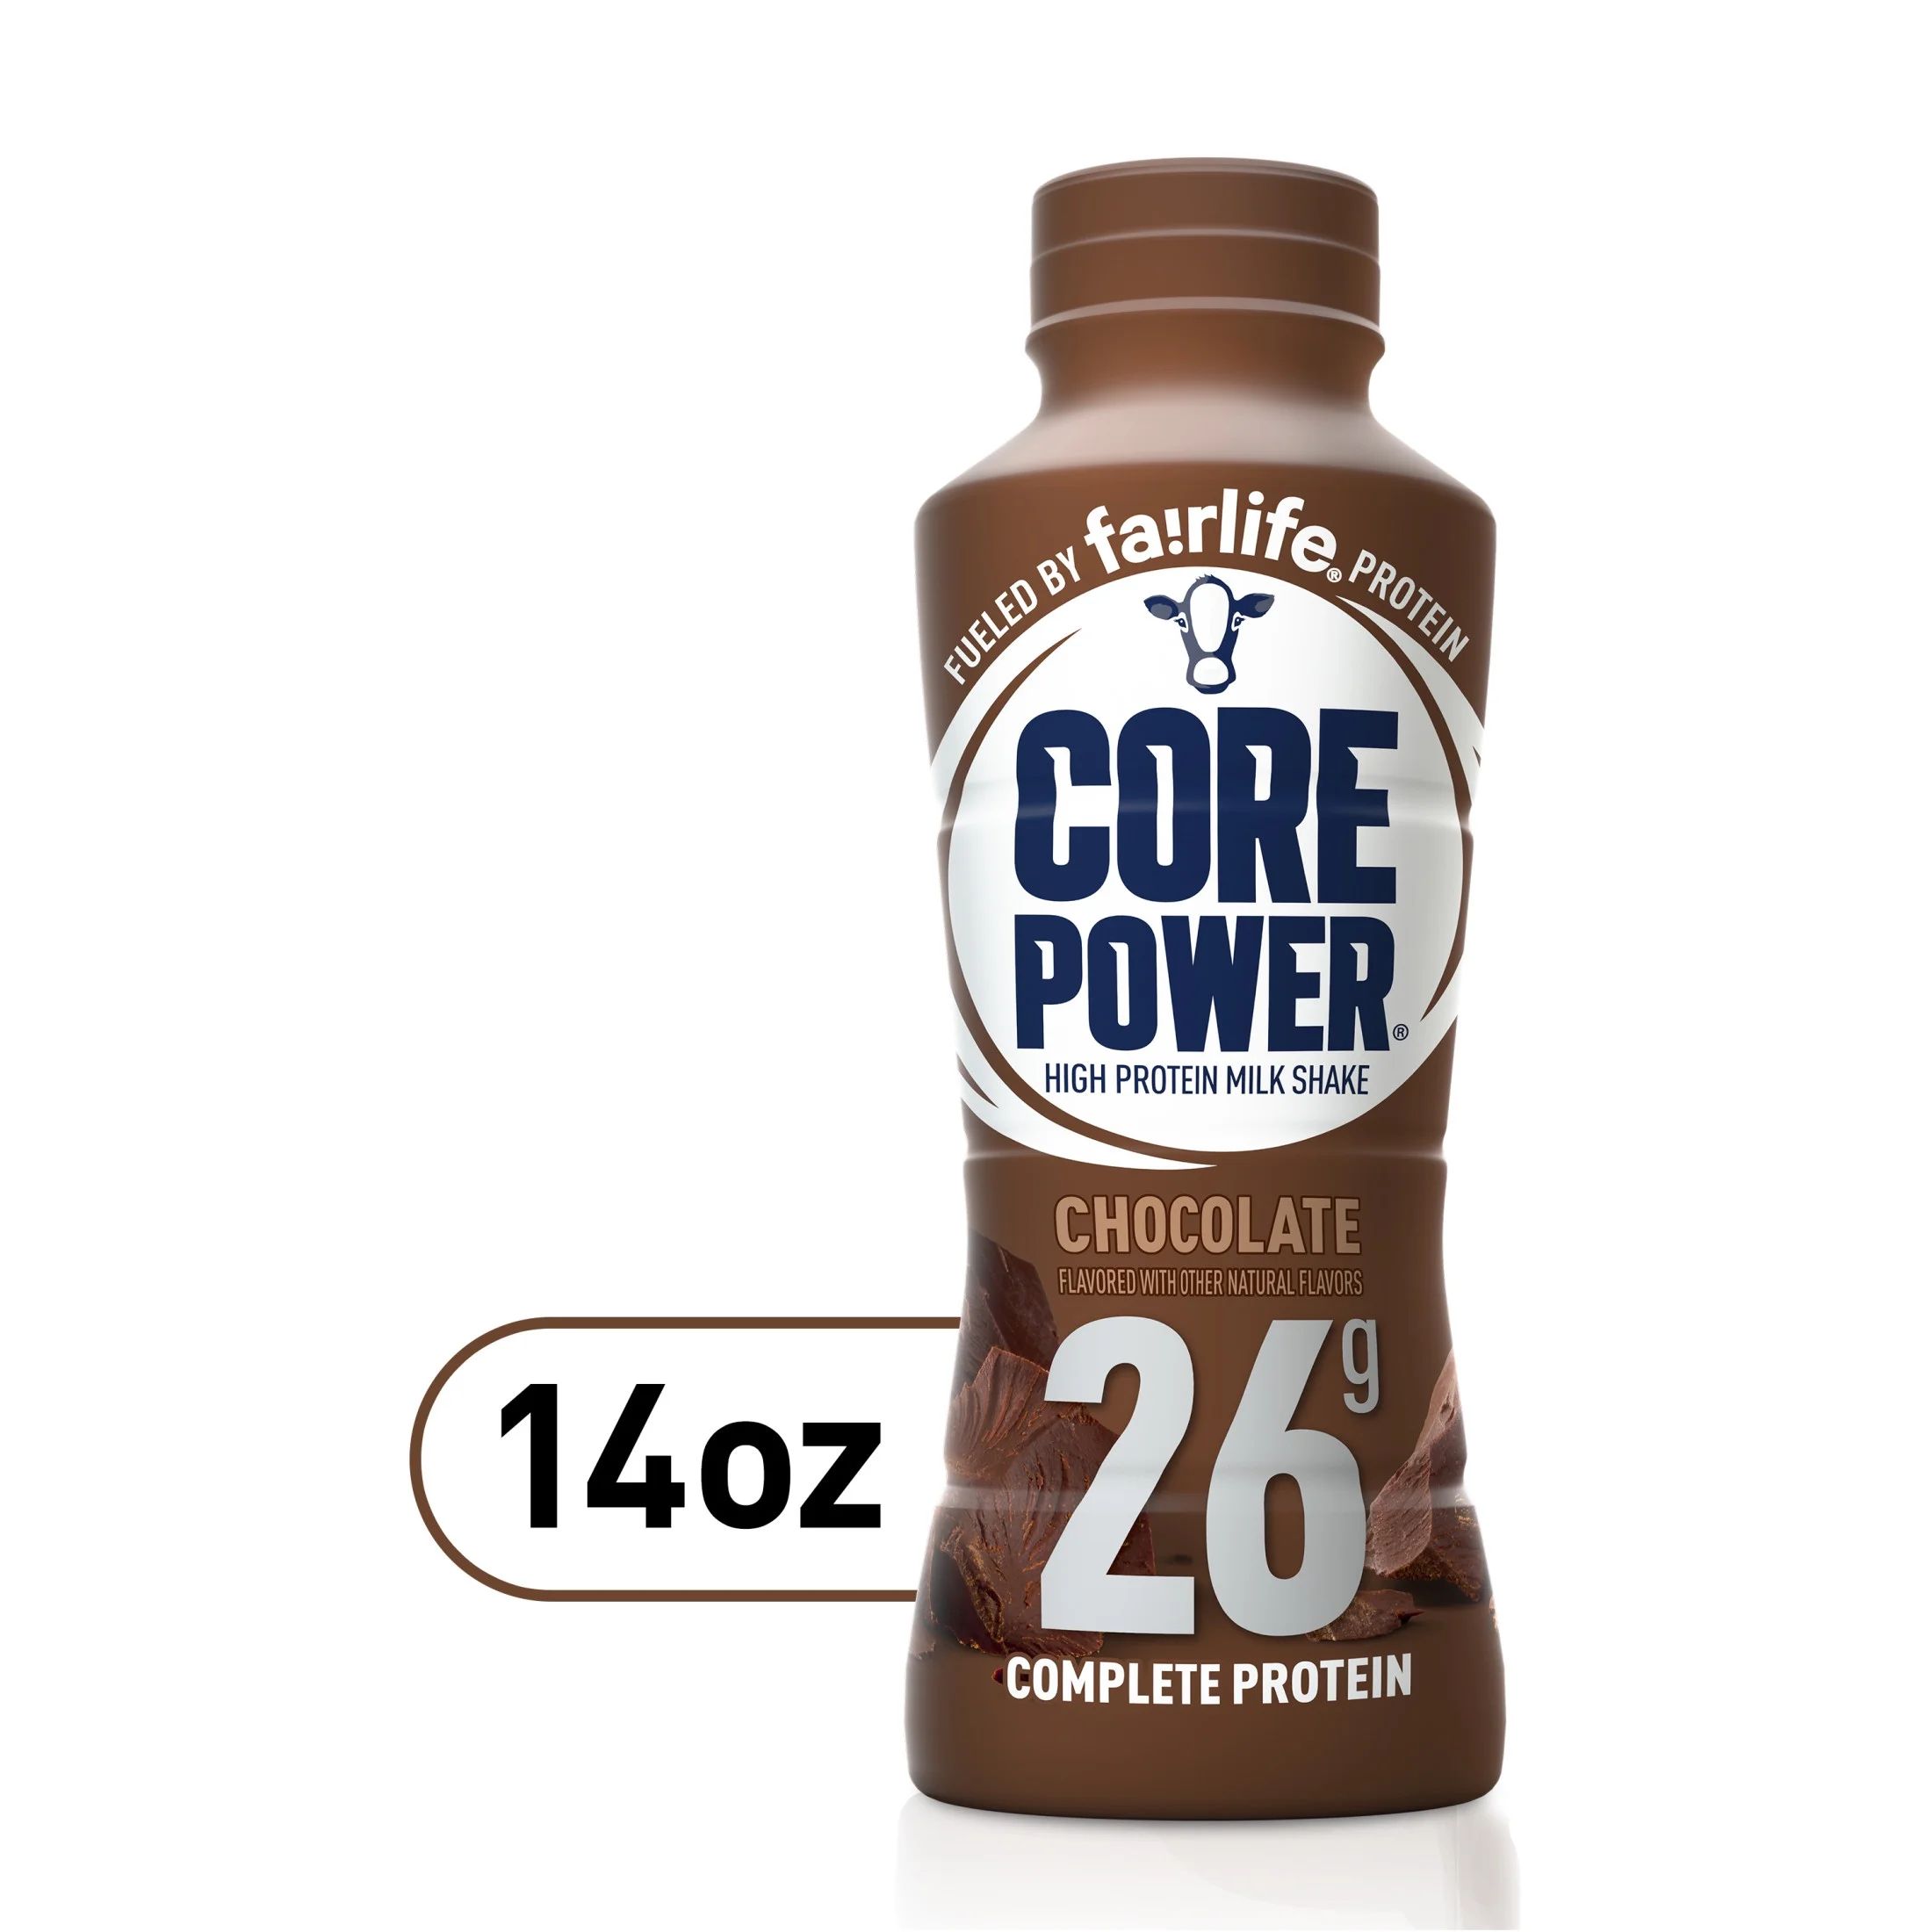 Core Power Protein Shake with 26g Protein by fairlife Milk, Chocolate, 14 fl oz | Walmart (US)